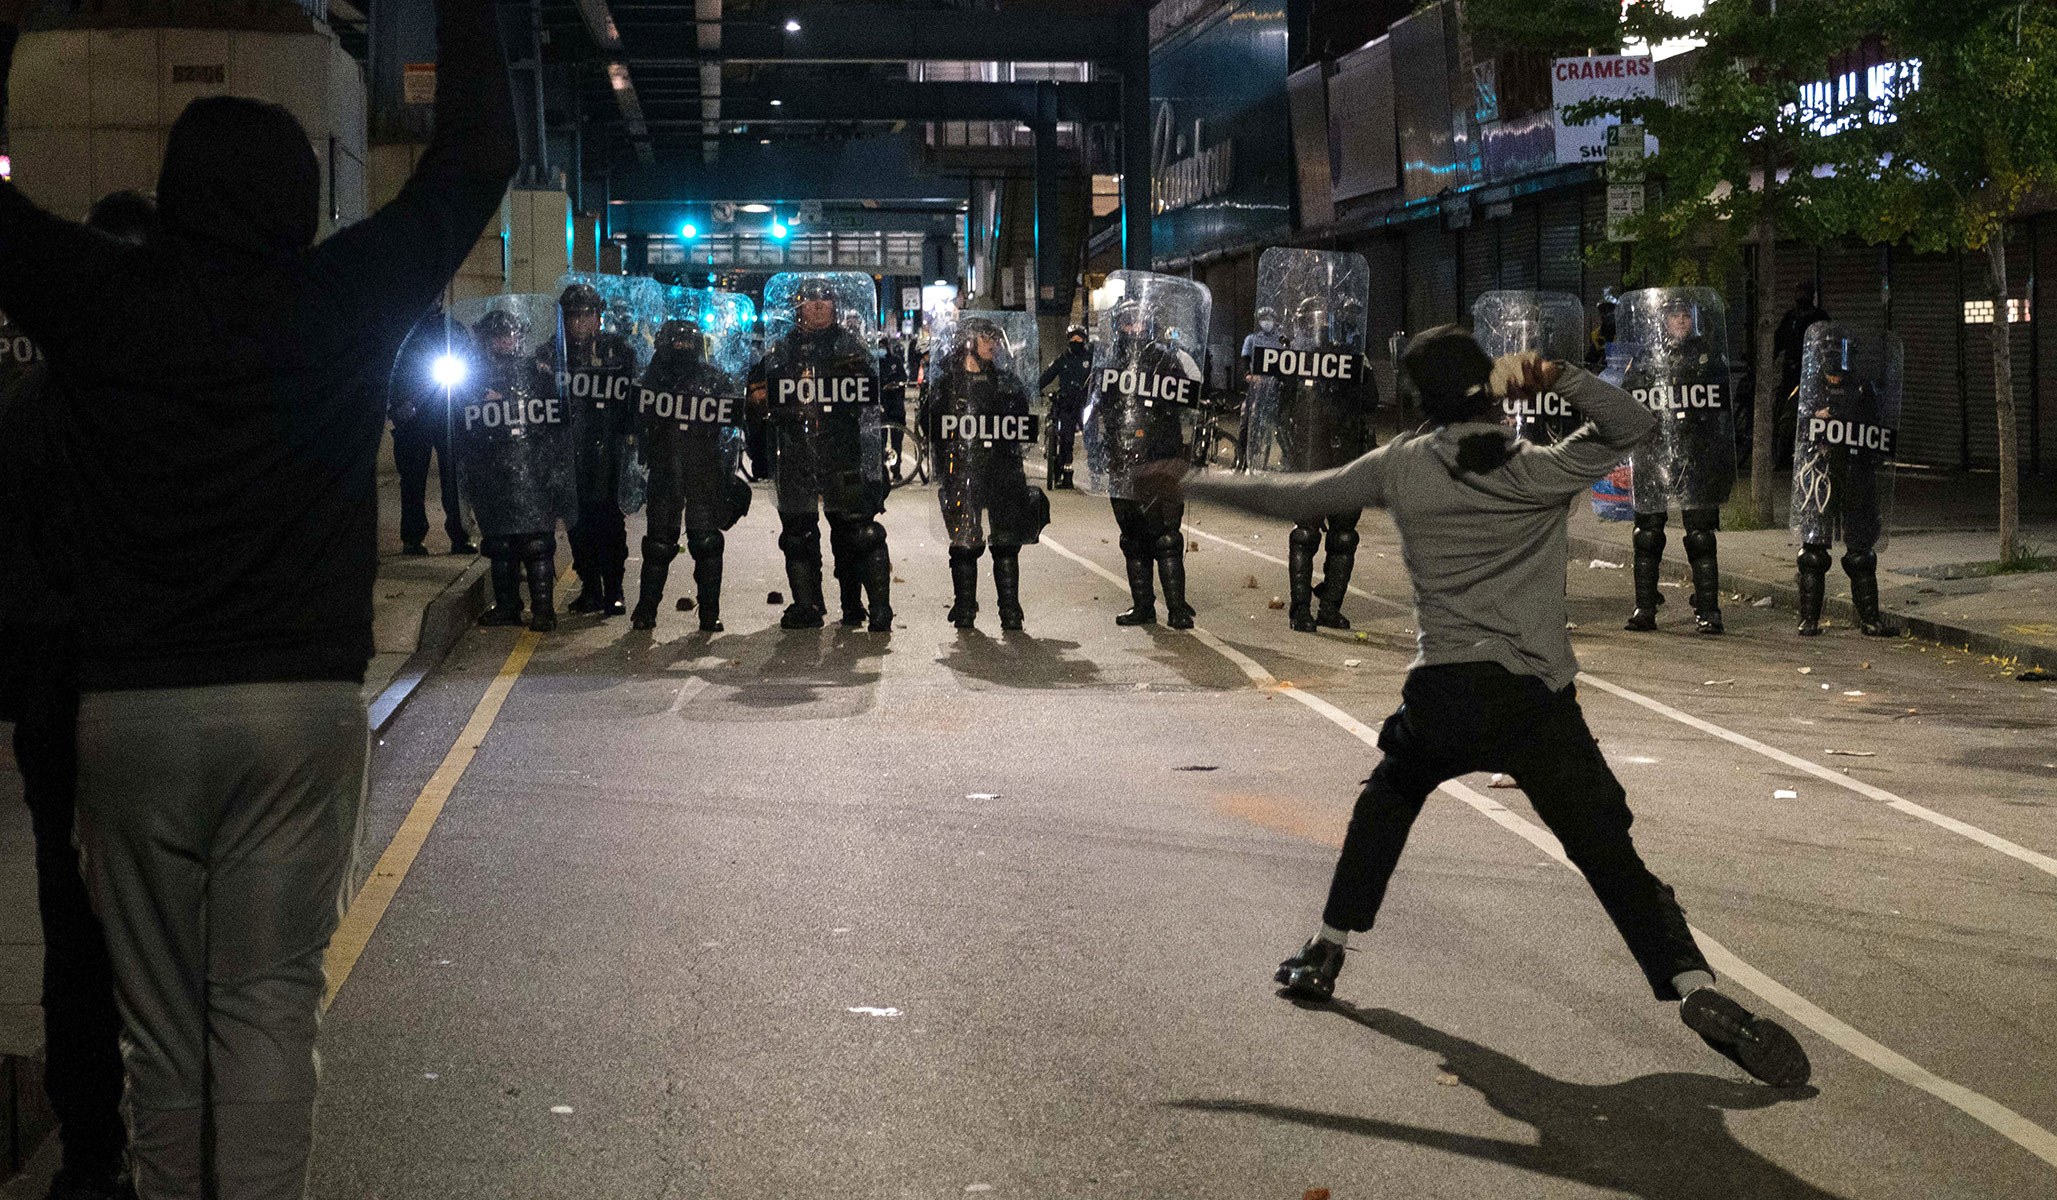 The New Normal Riots and Looting in Philadelphia After Police Shoot